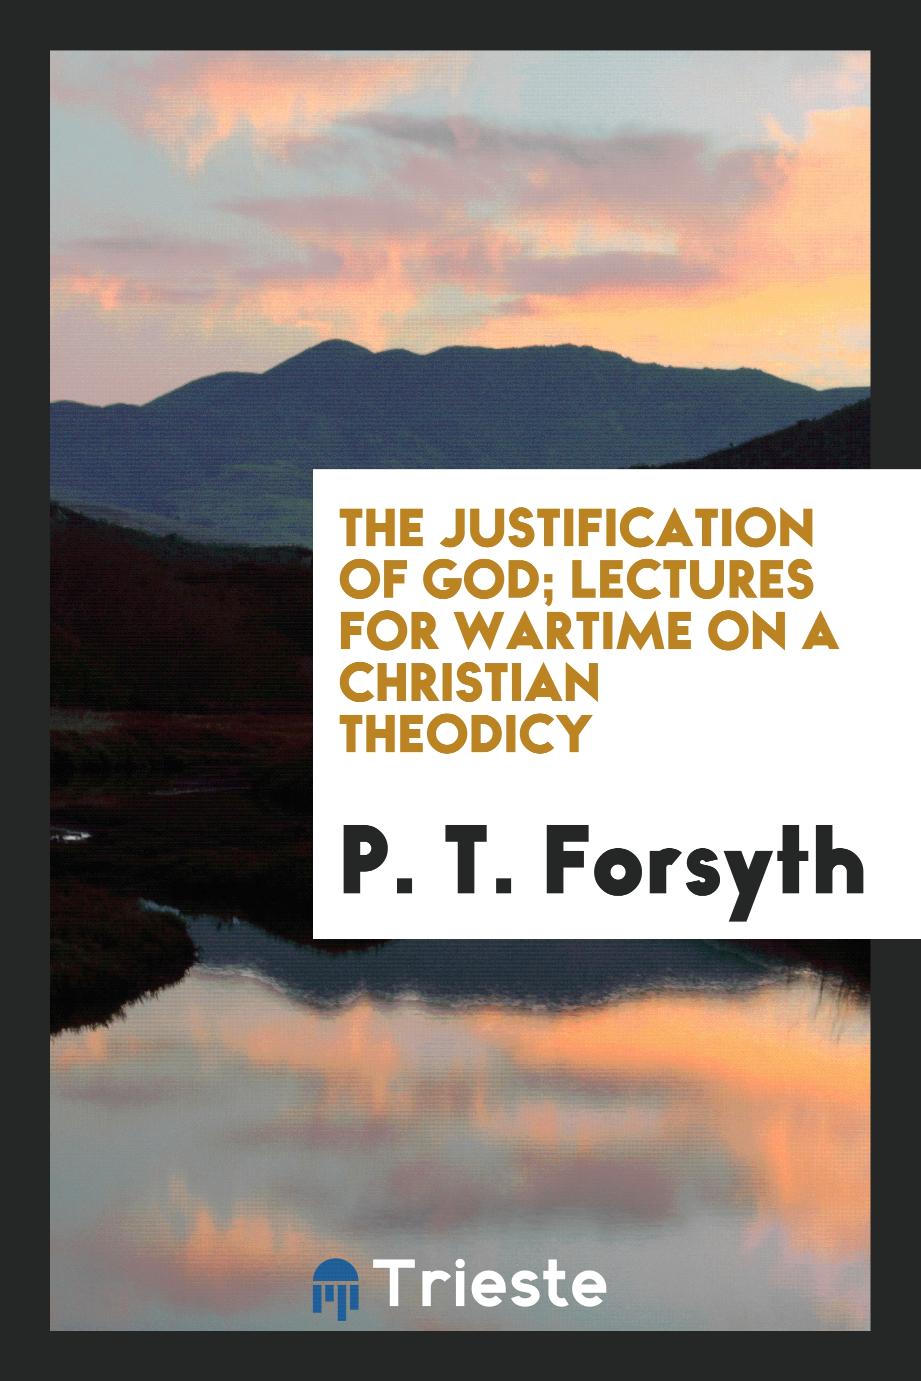 The justification of God; lectures for wartime on a Christian theodicy